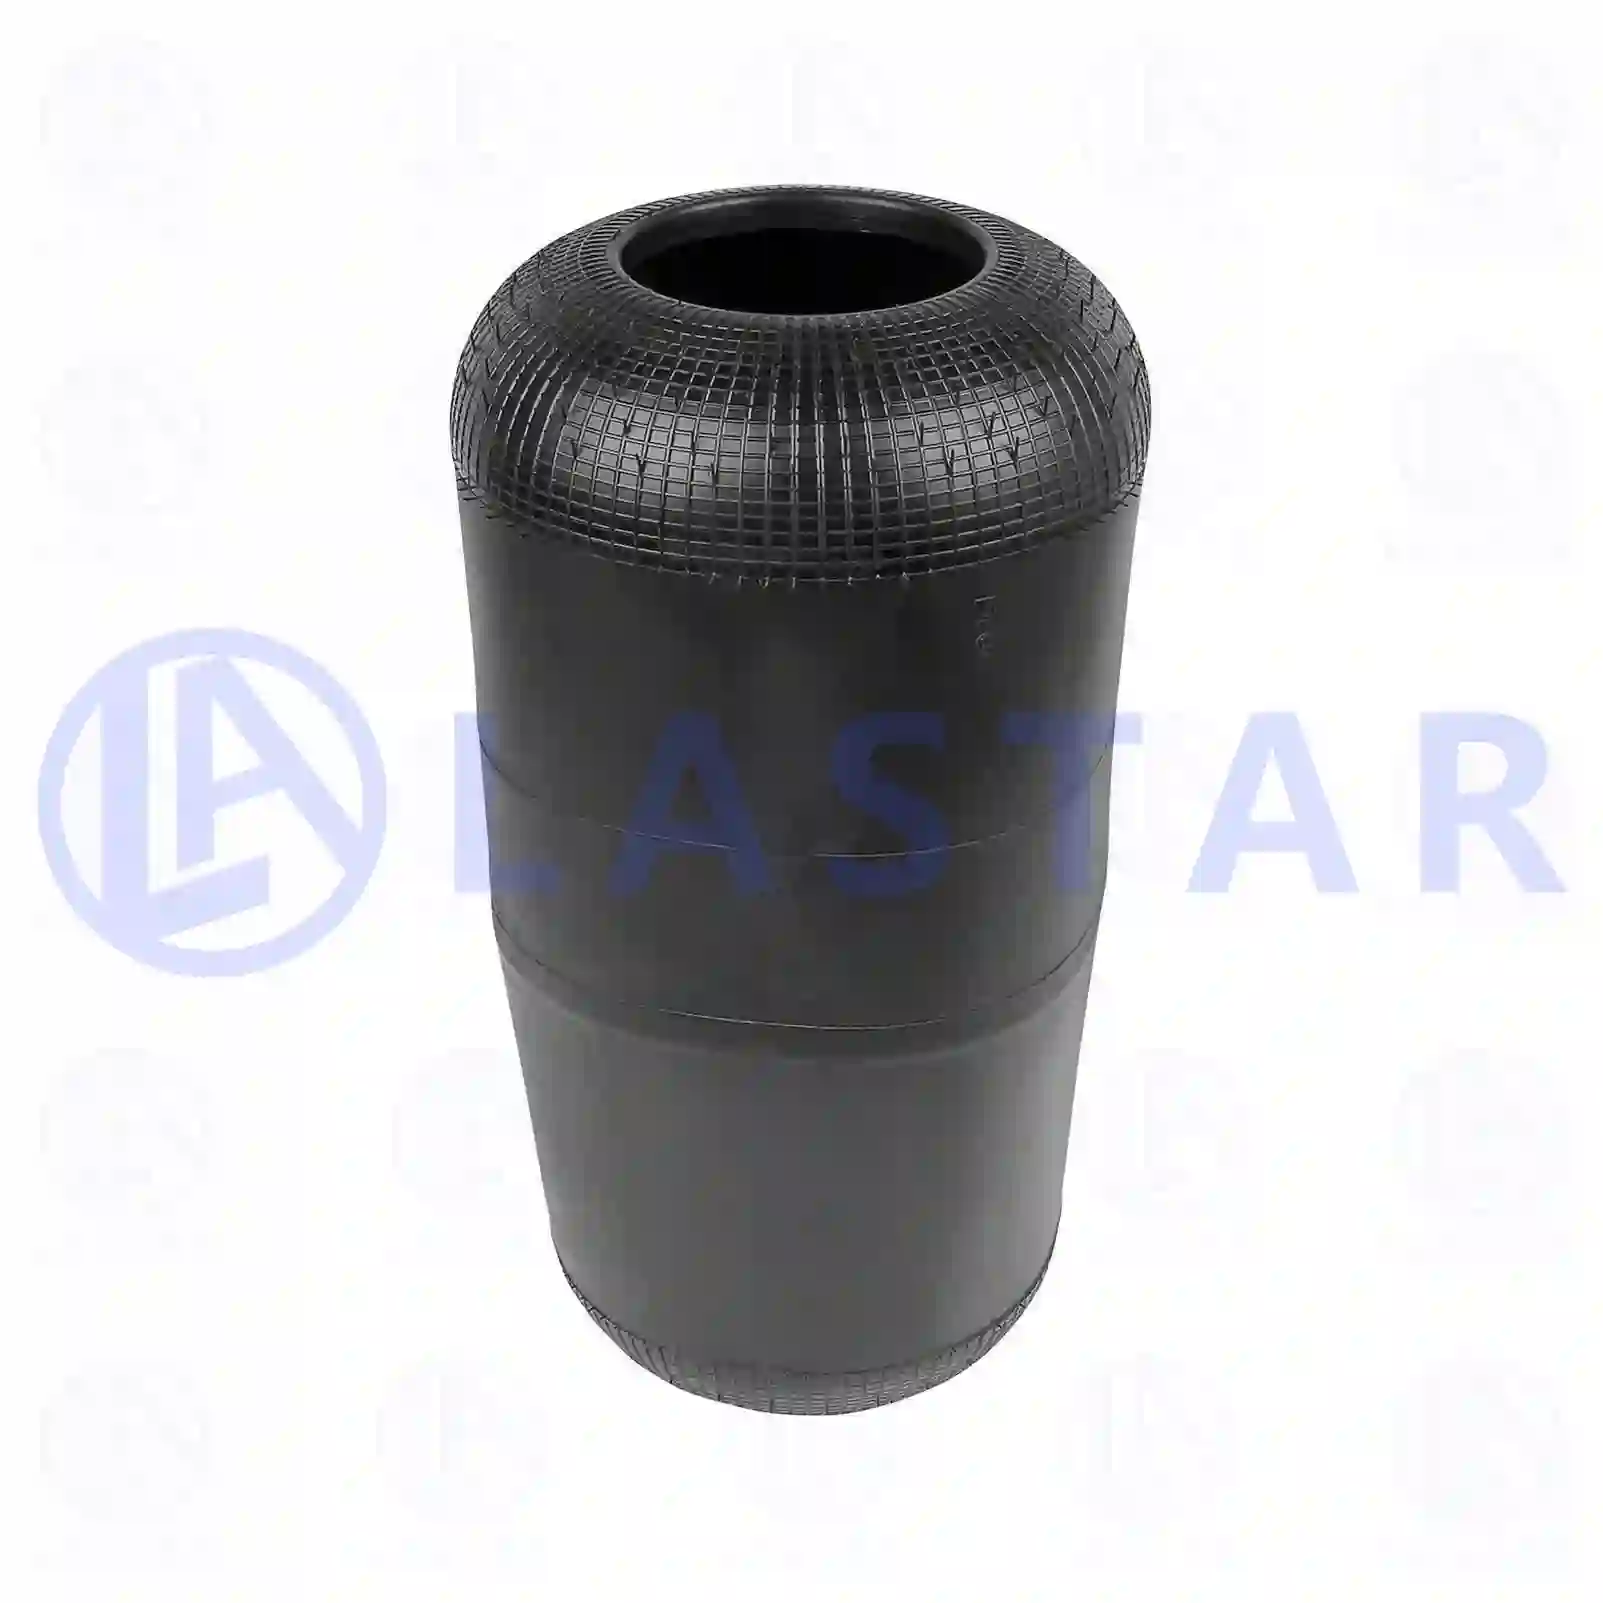 Air spring, without piston, 77729094, MLF7082, 1075290, 1622122, ZG40806-0008 ||  77729094 Lastar Spare Part | Truck Spare Parts, Auotomotive Spare Parts Air spring, without piston, 77729094, MLF7082, 1075290, 1622122, ZG40806-0008 ||  77729094 Lastar Spare Part | Truck Spare Parts, Auotomotive Spare Parts